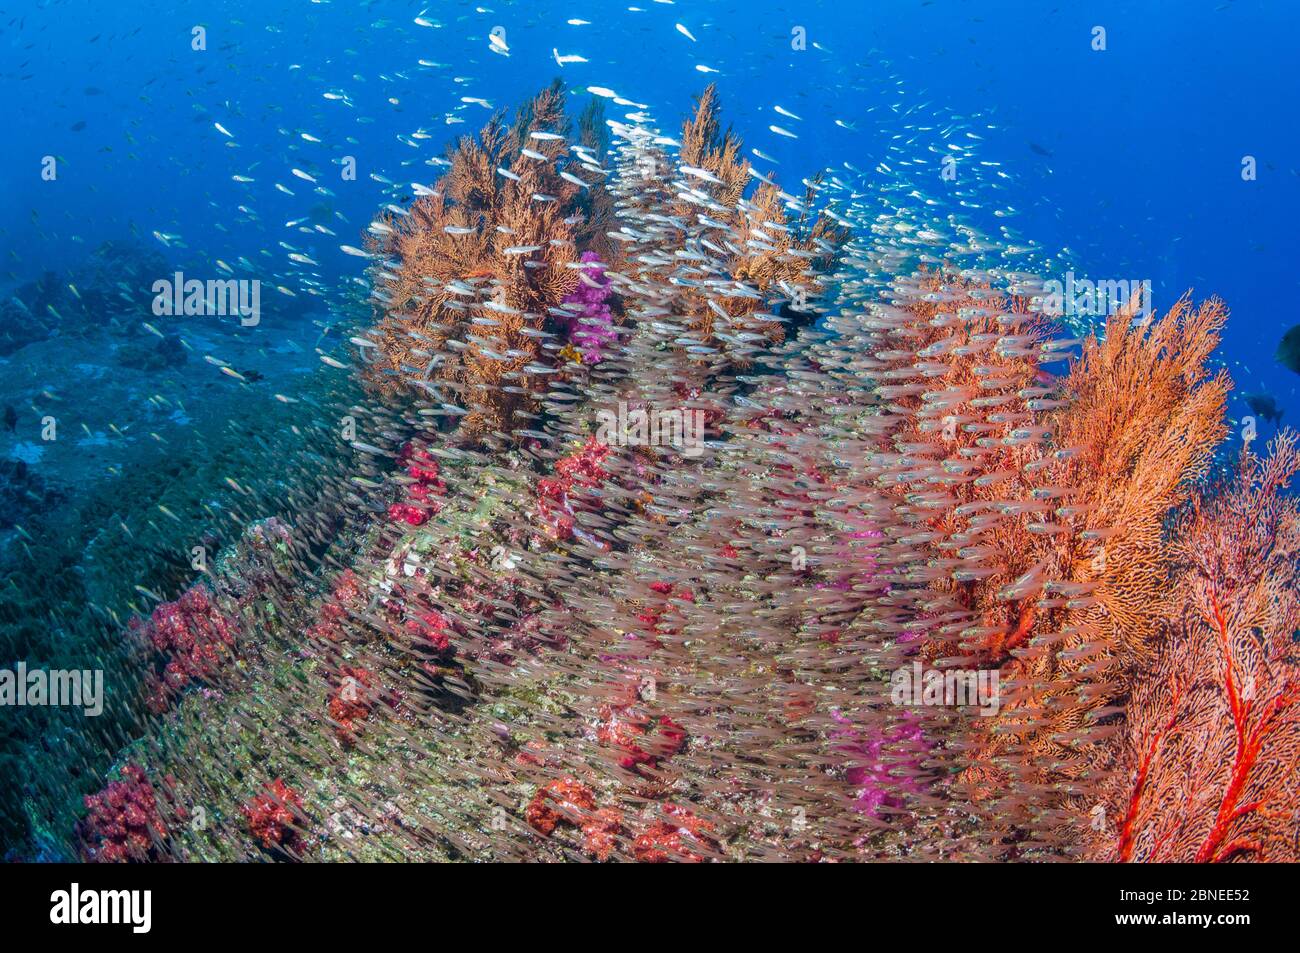 Gorgonian sea fan (Melithaea sp.) and Soft corals (Dendronephthya sp.) with a large school of Pygmy sweepers (Parapriacanthus ransonetti) Andaman Sea, Stock Photo